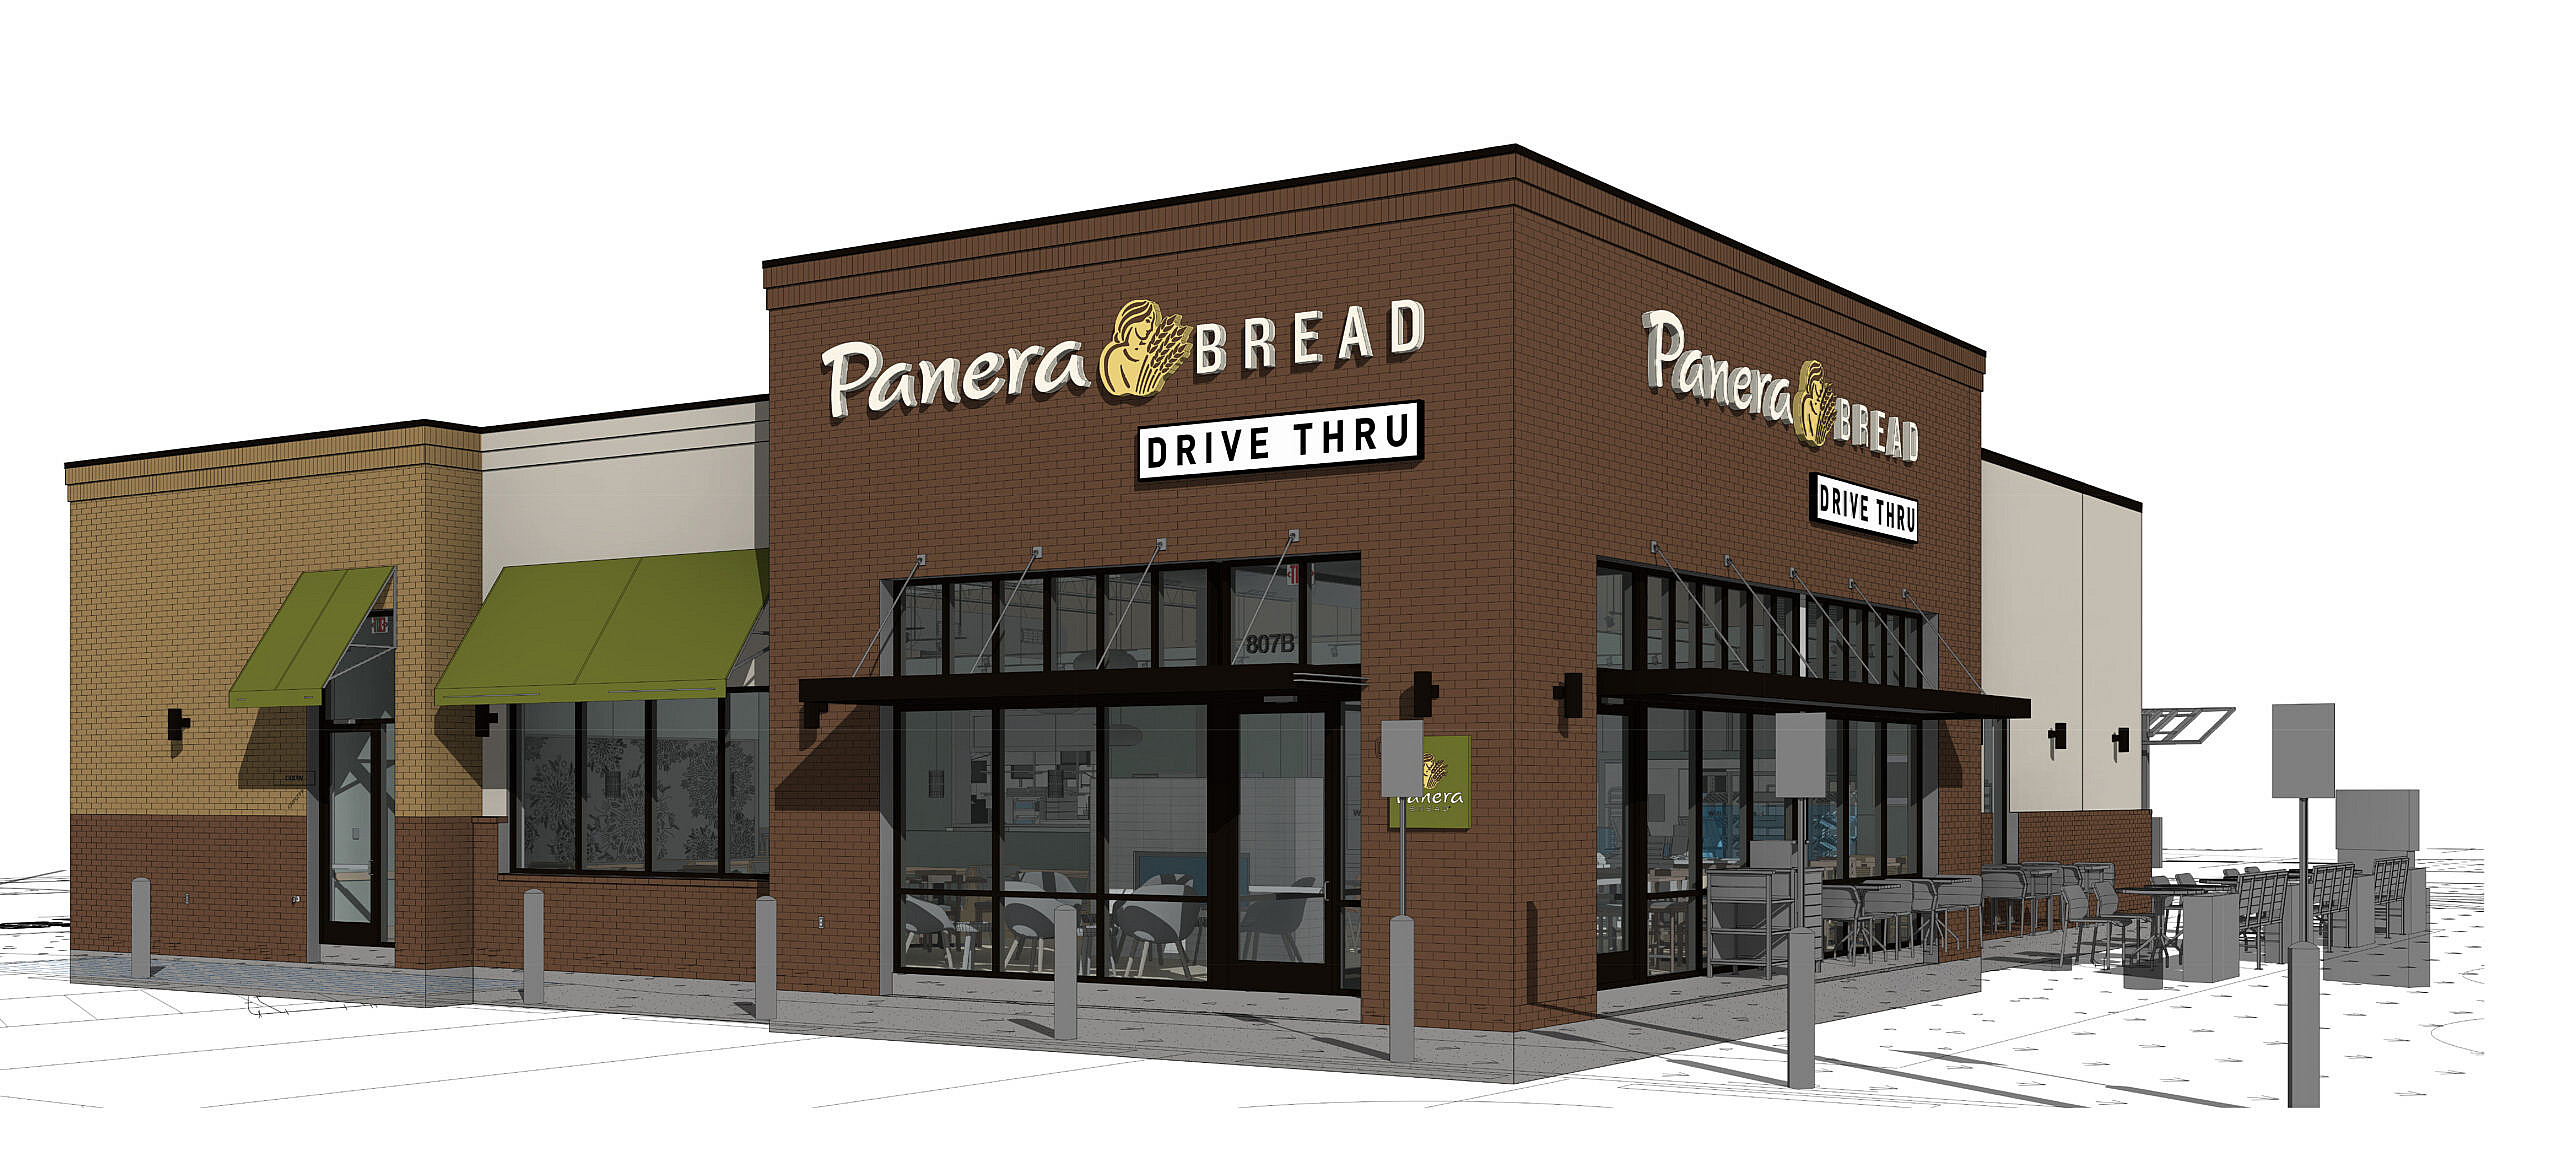 You are currently viewing Harbour Retail Partners Closes on Single Tenant Development for Panera Bread in Lawton, OK